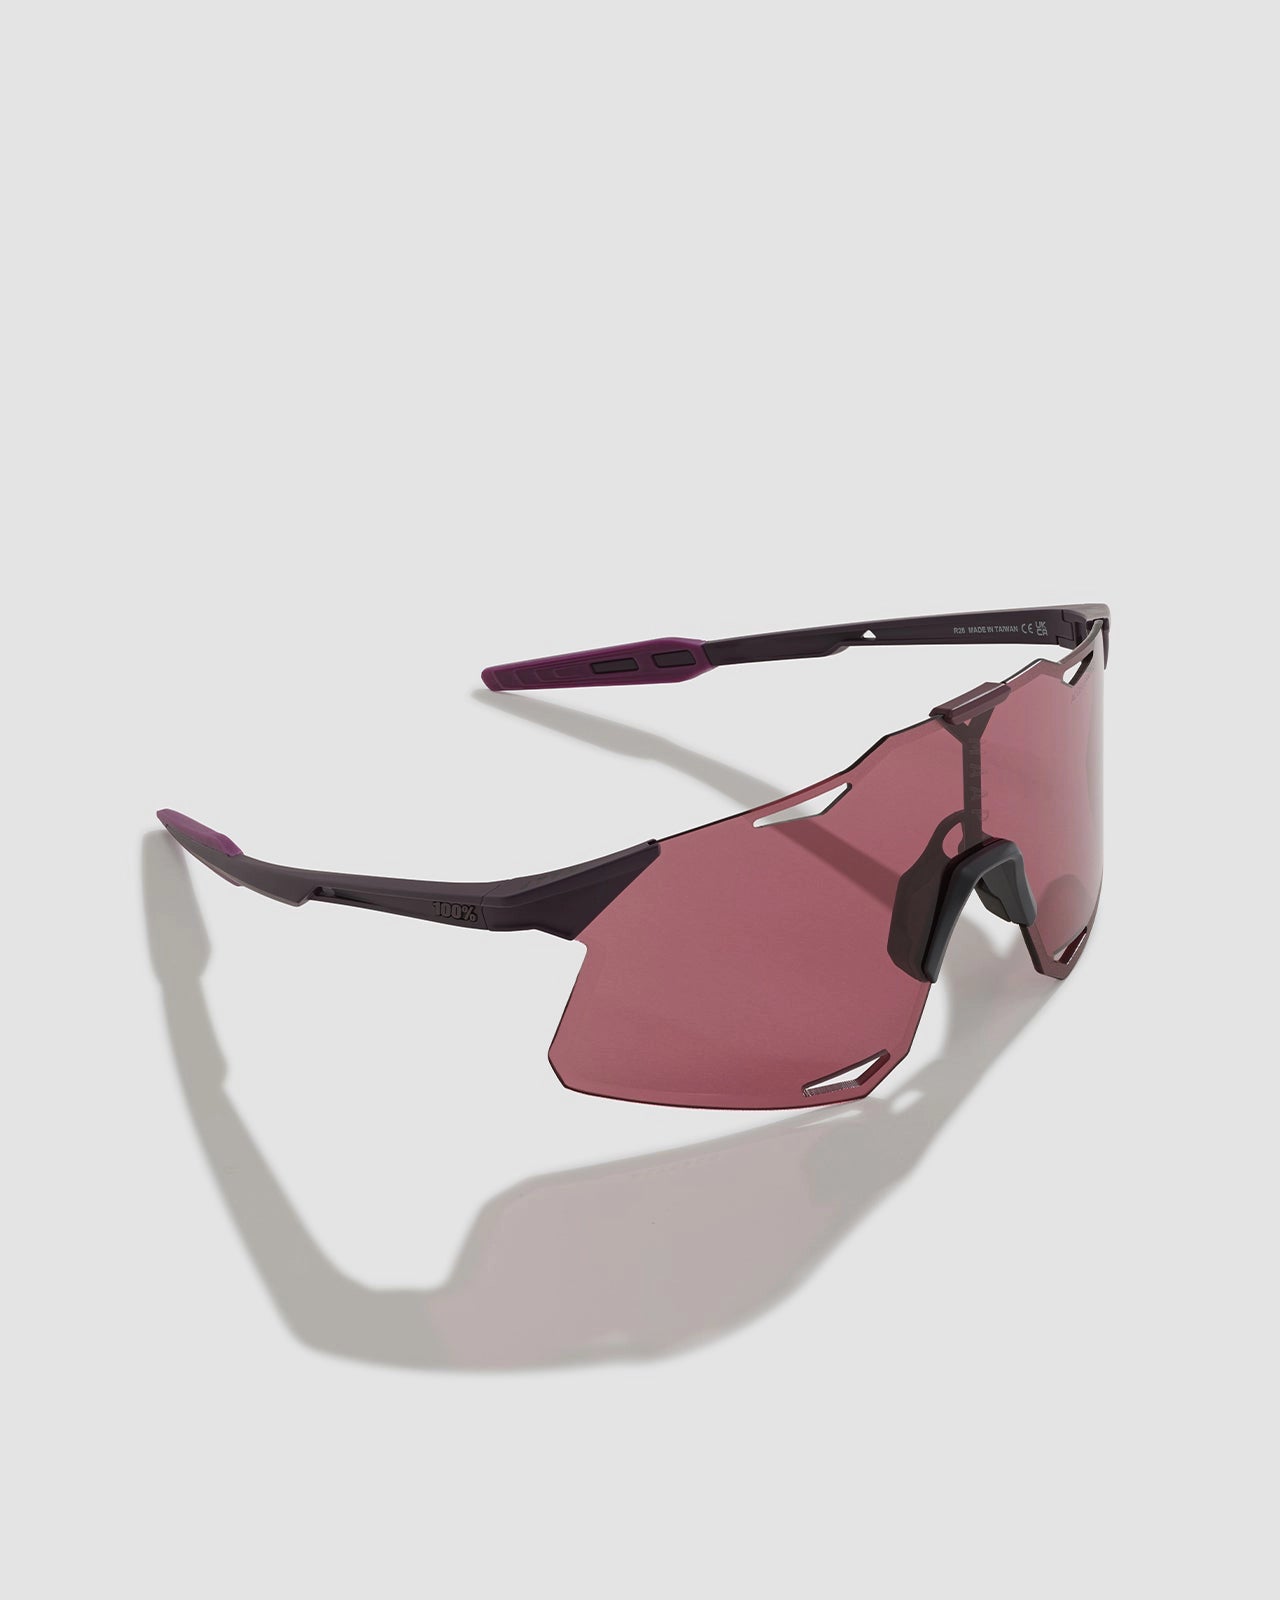 MAAP cycling sunglasses with 100% collaboration 